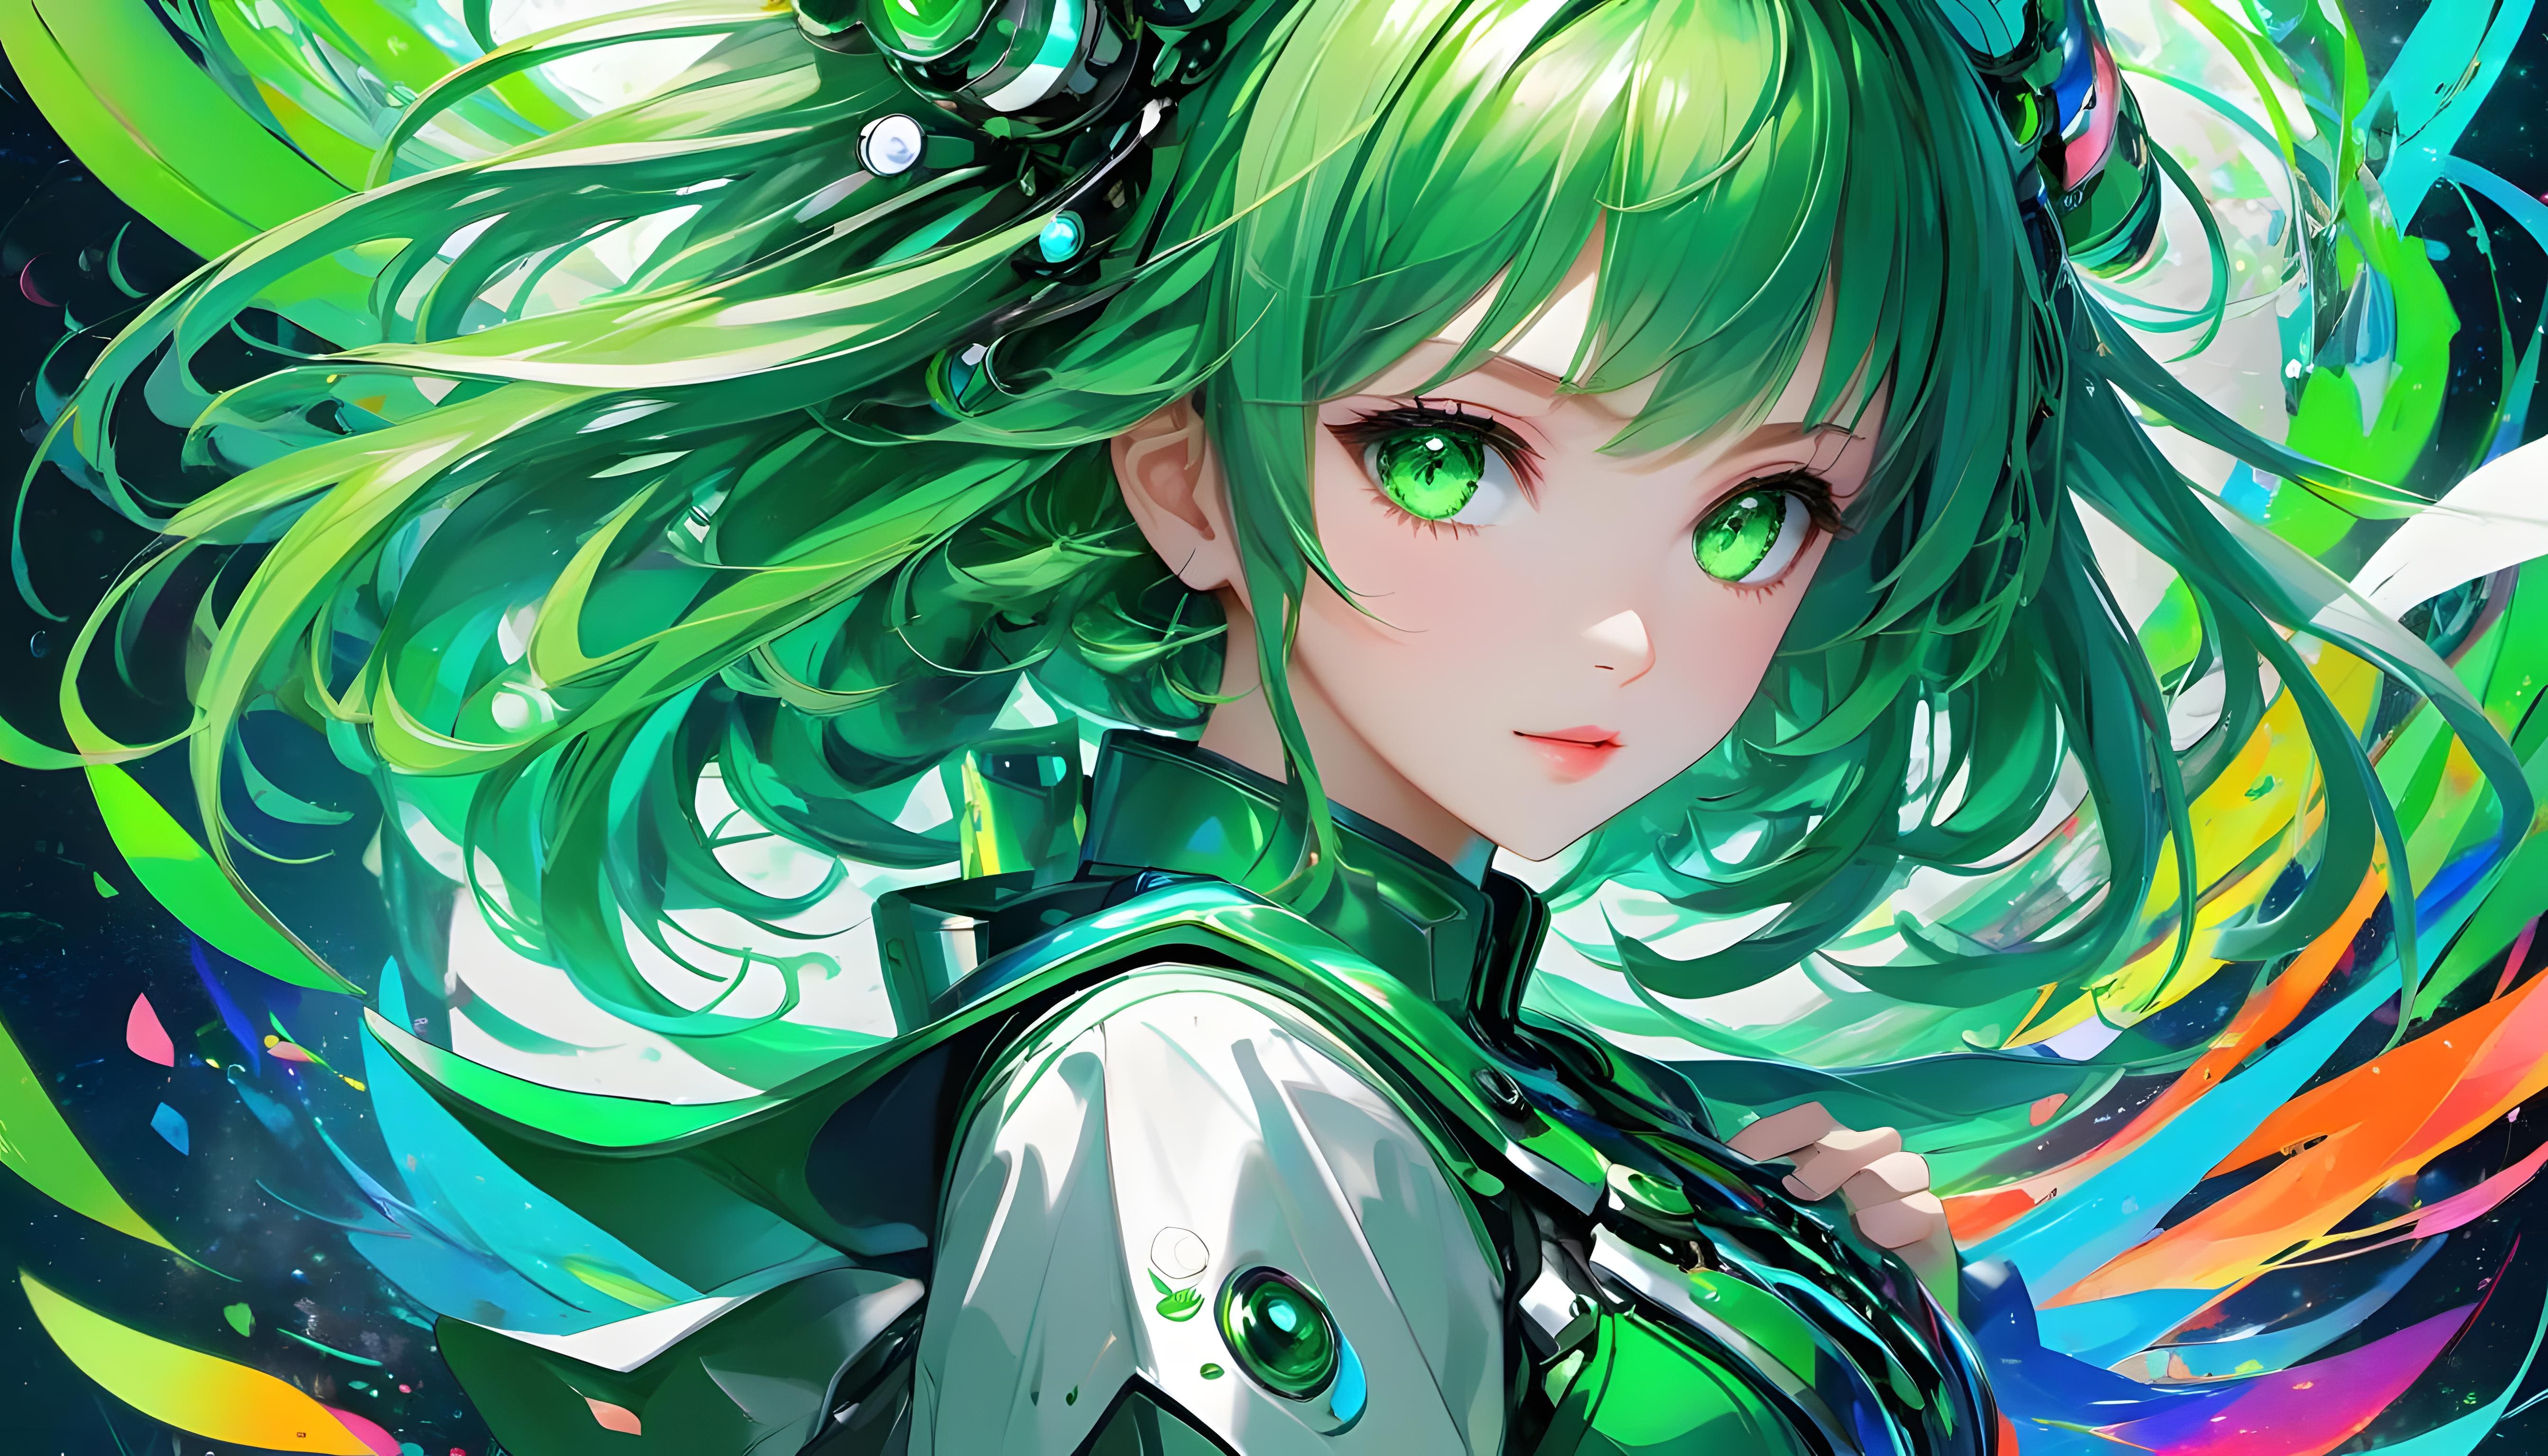 Enigmatic Green Eyes: Anime Girl Wallpaper - 4K Resolution - Free Download